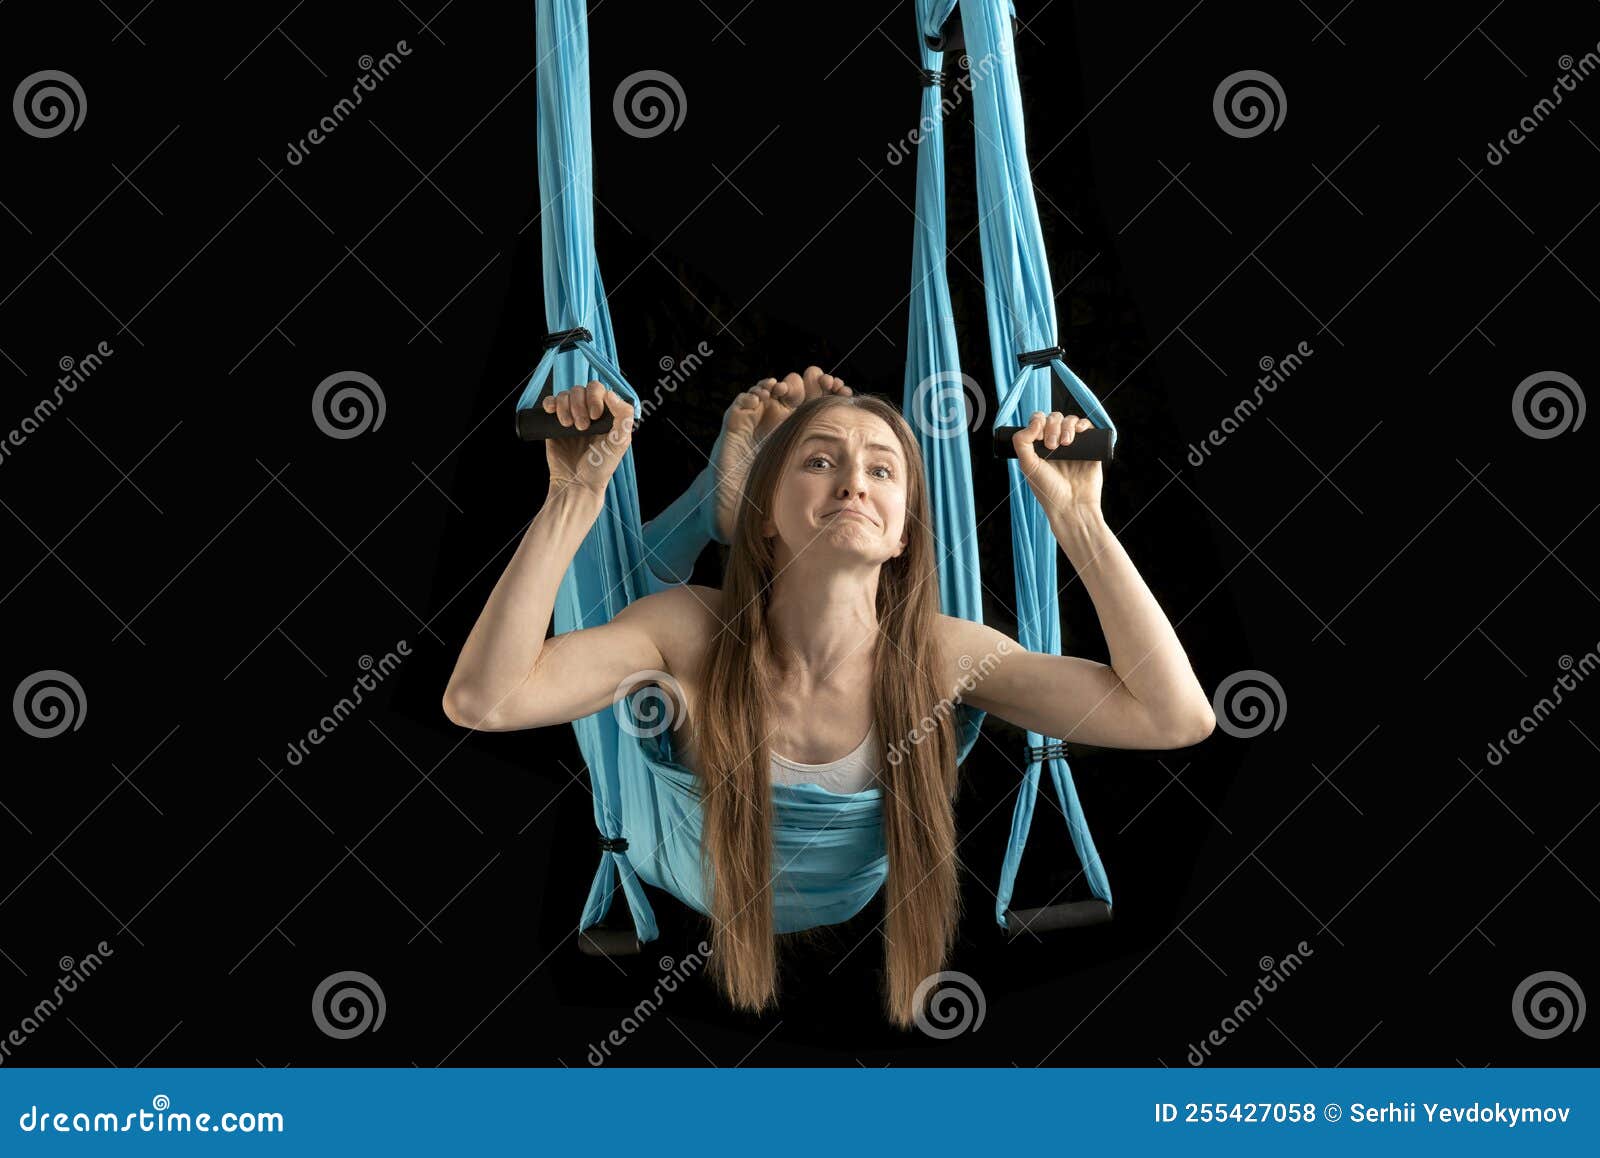 Exercising woman holding gymnast rings and looking away. Female